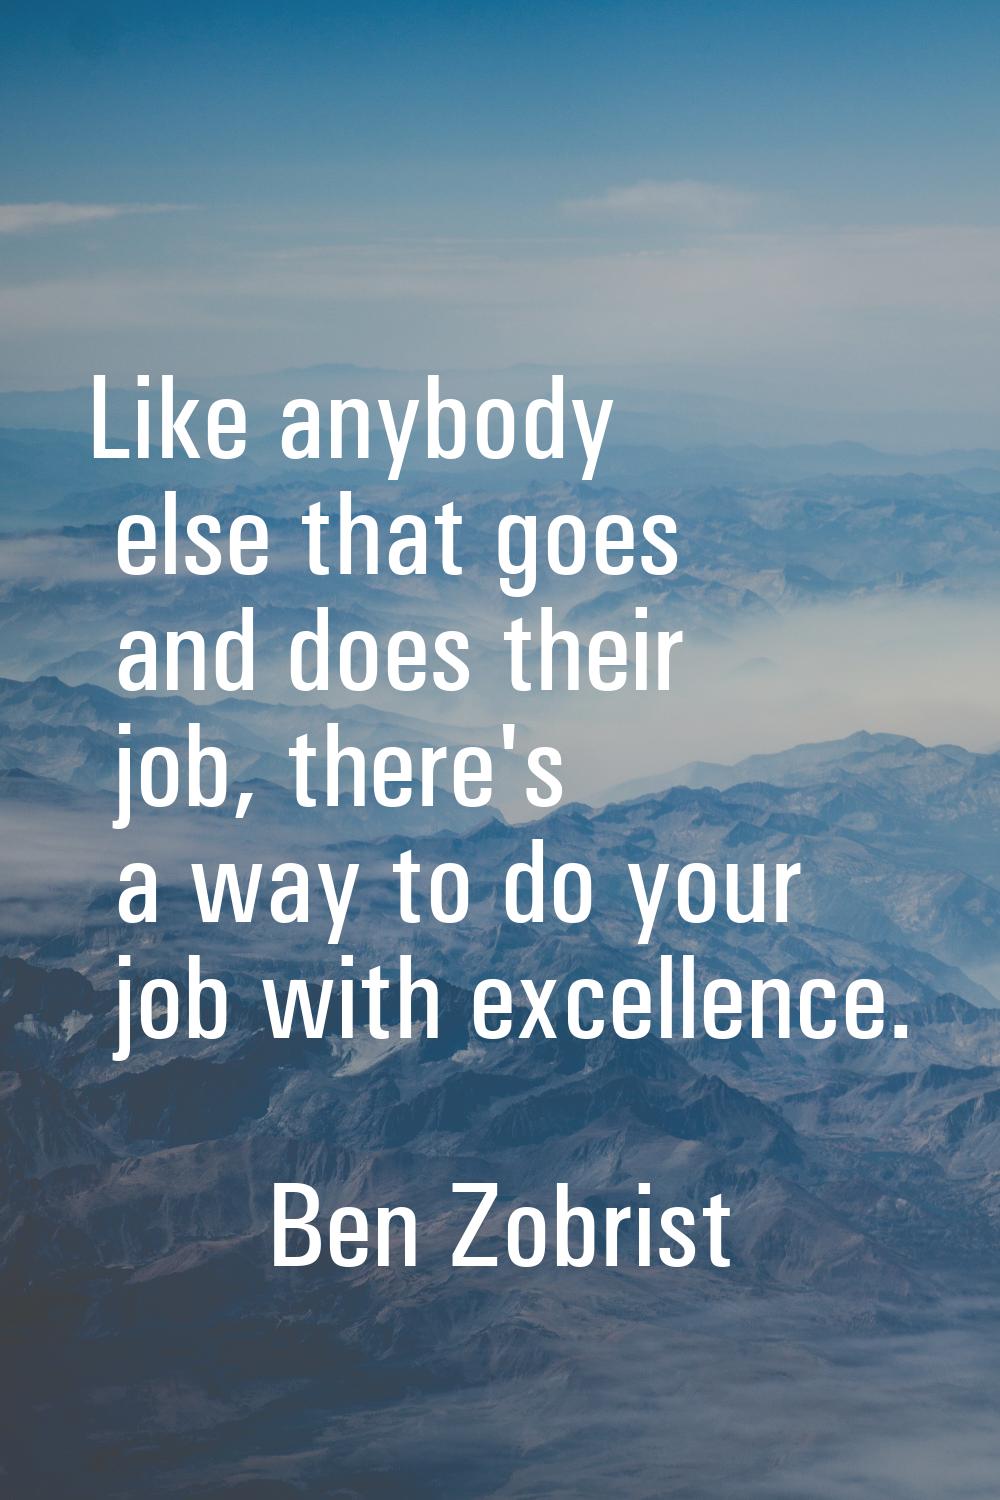 Like anybody else that goes and does their job, there's a way to do your job with excellence.